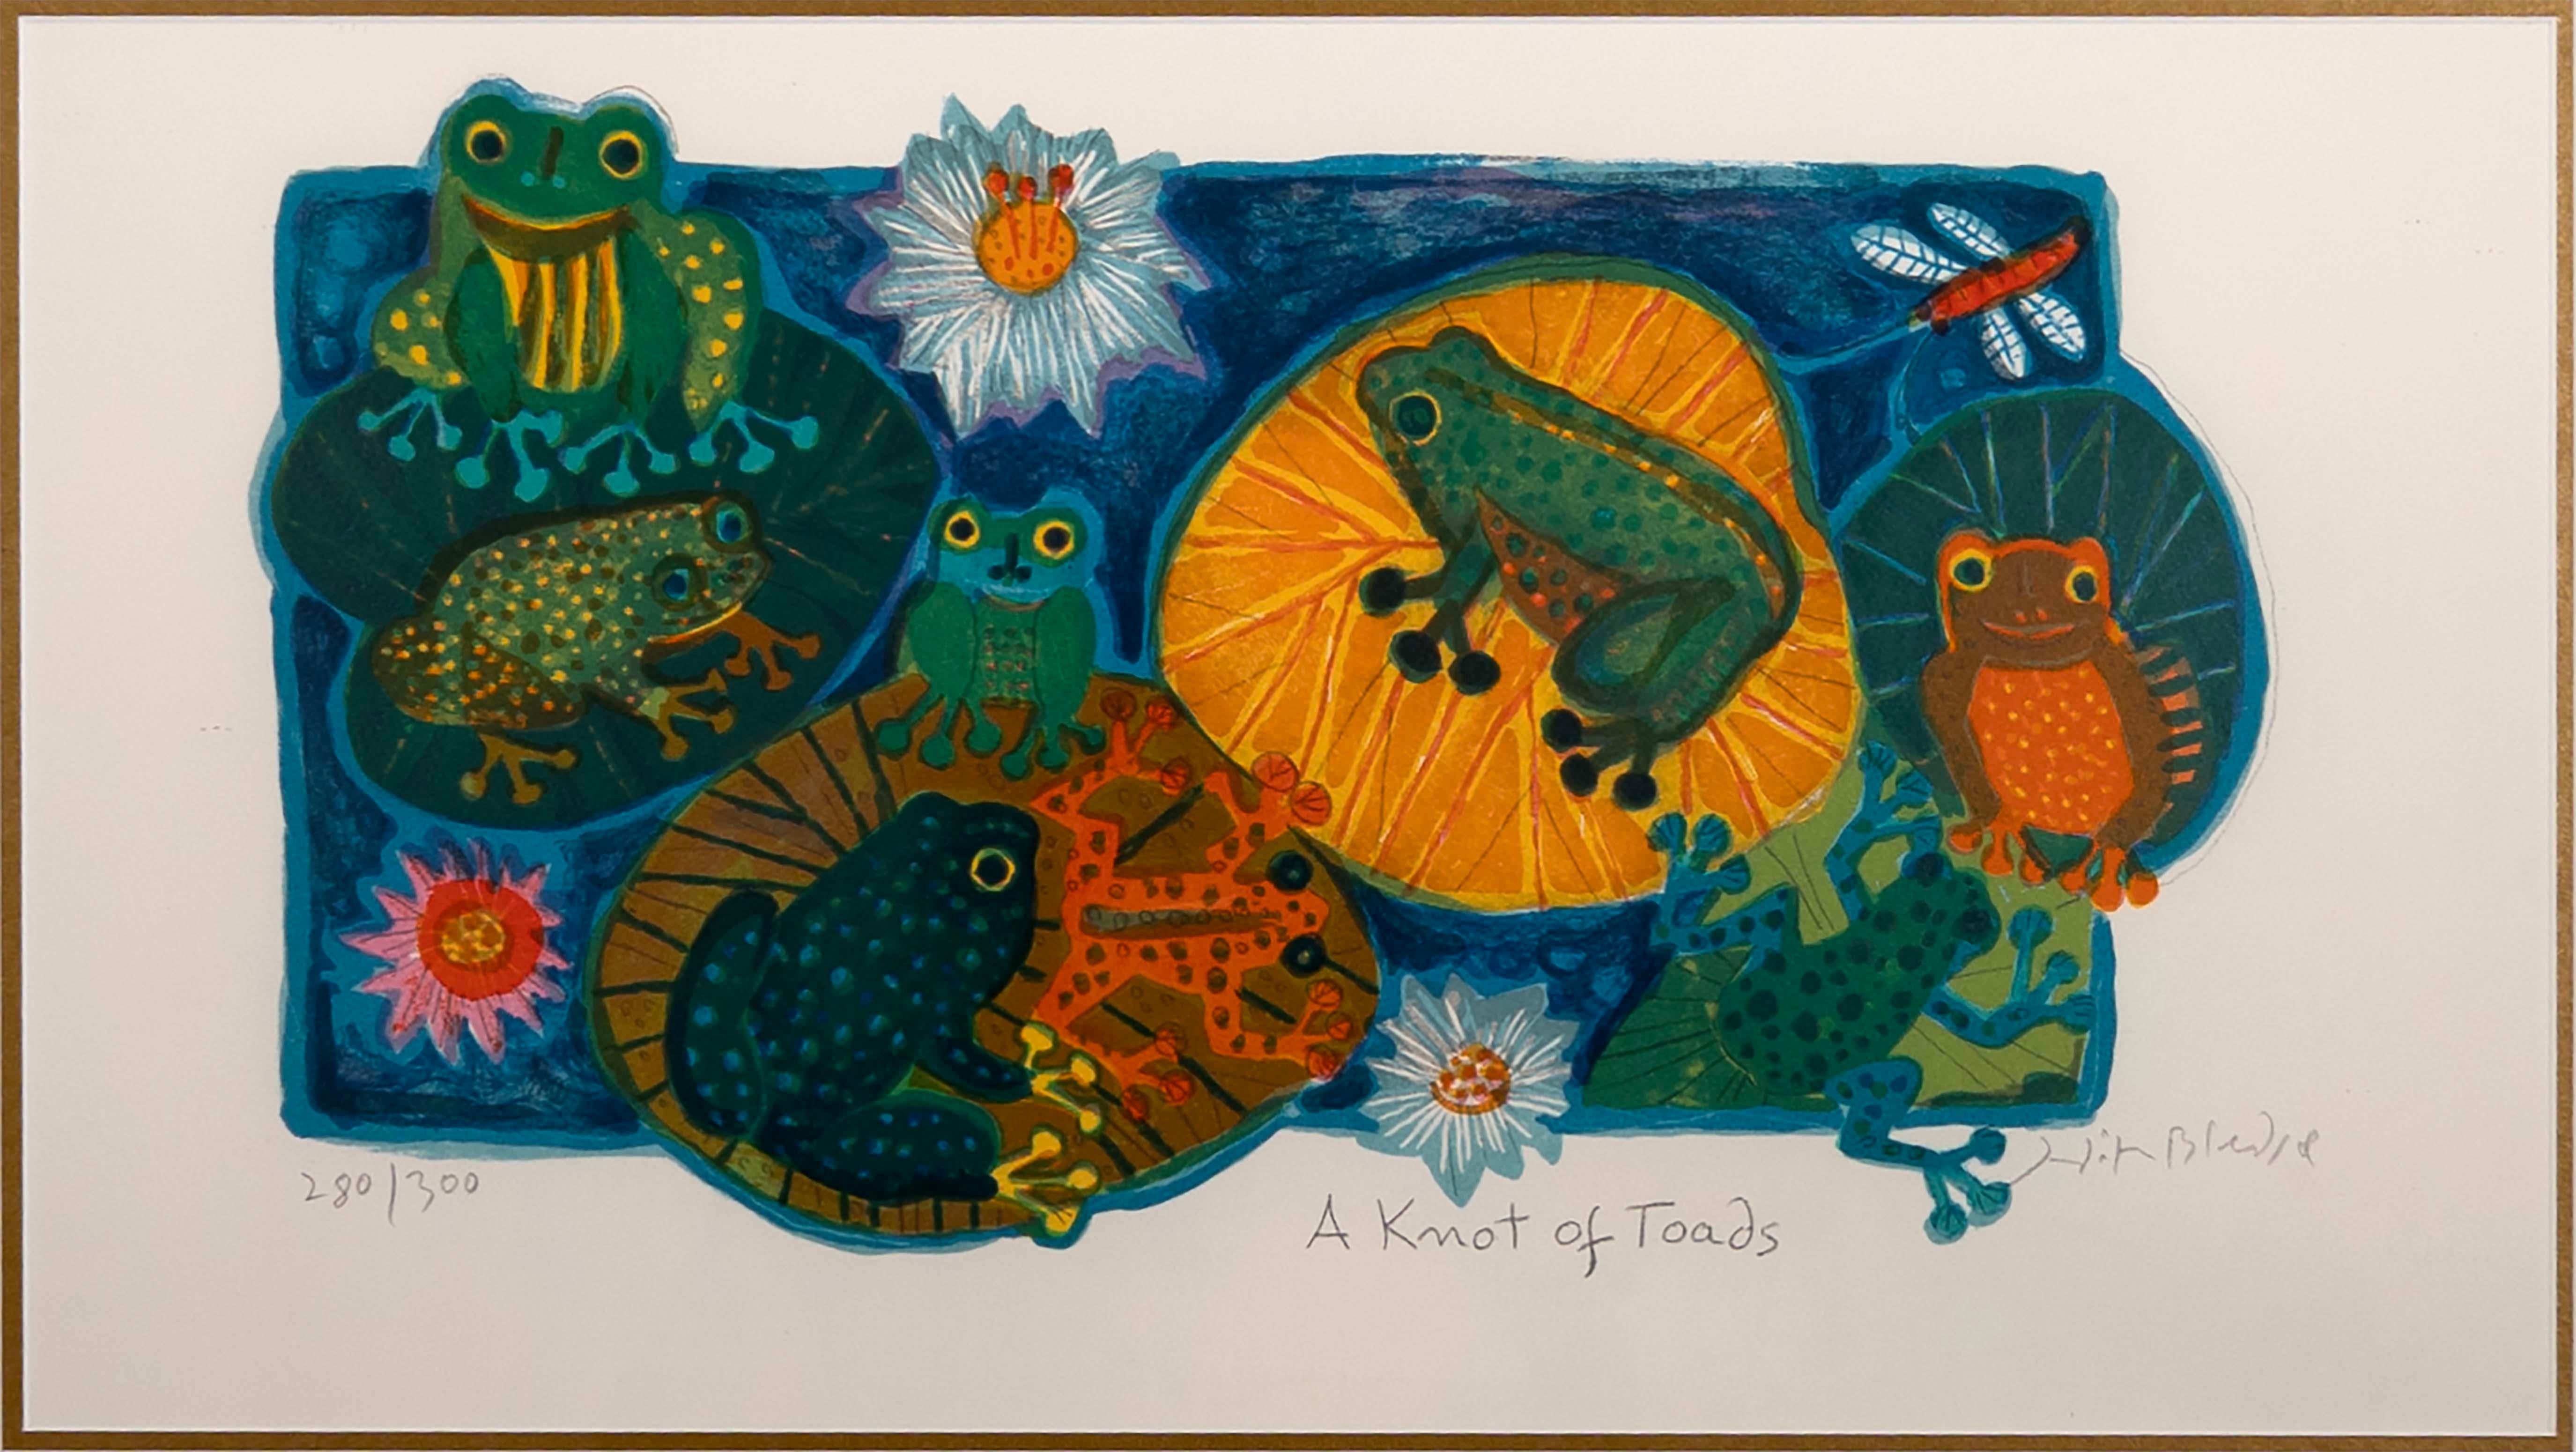 An imaginative and whimsical embossed lithograph titled 